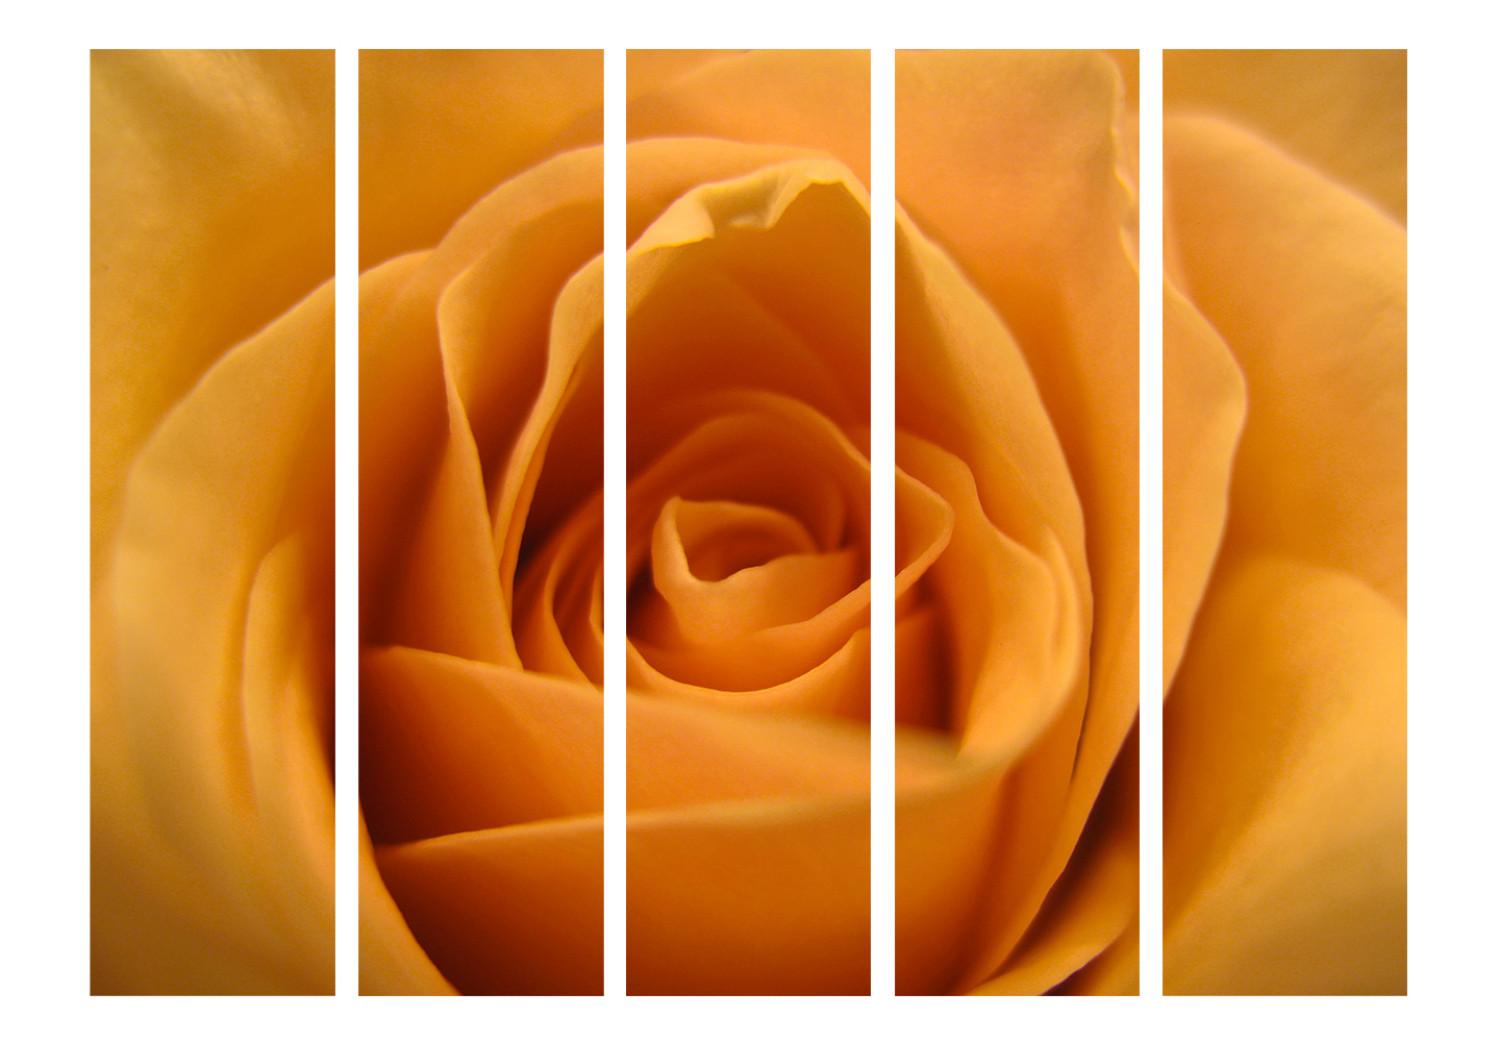 Room Divider Yellow Rose - Symbol of Friendship II - composition of a yellow-colored plant